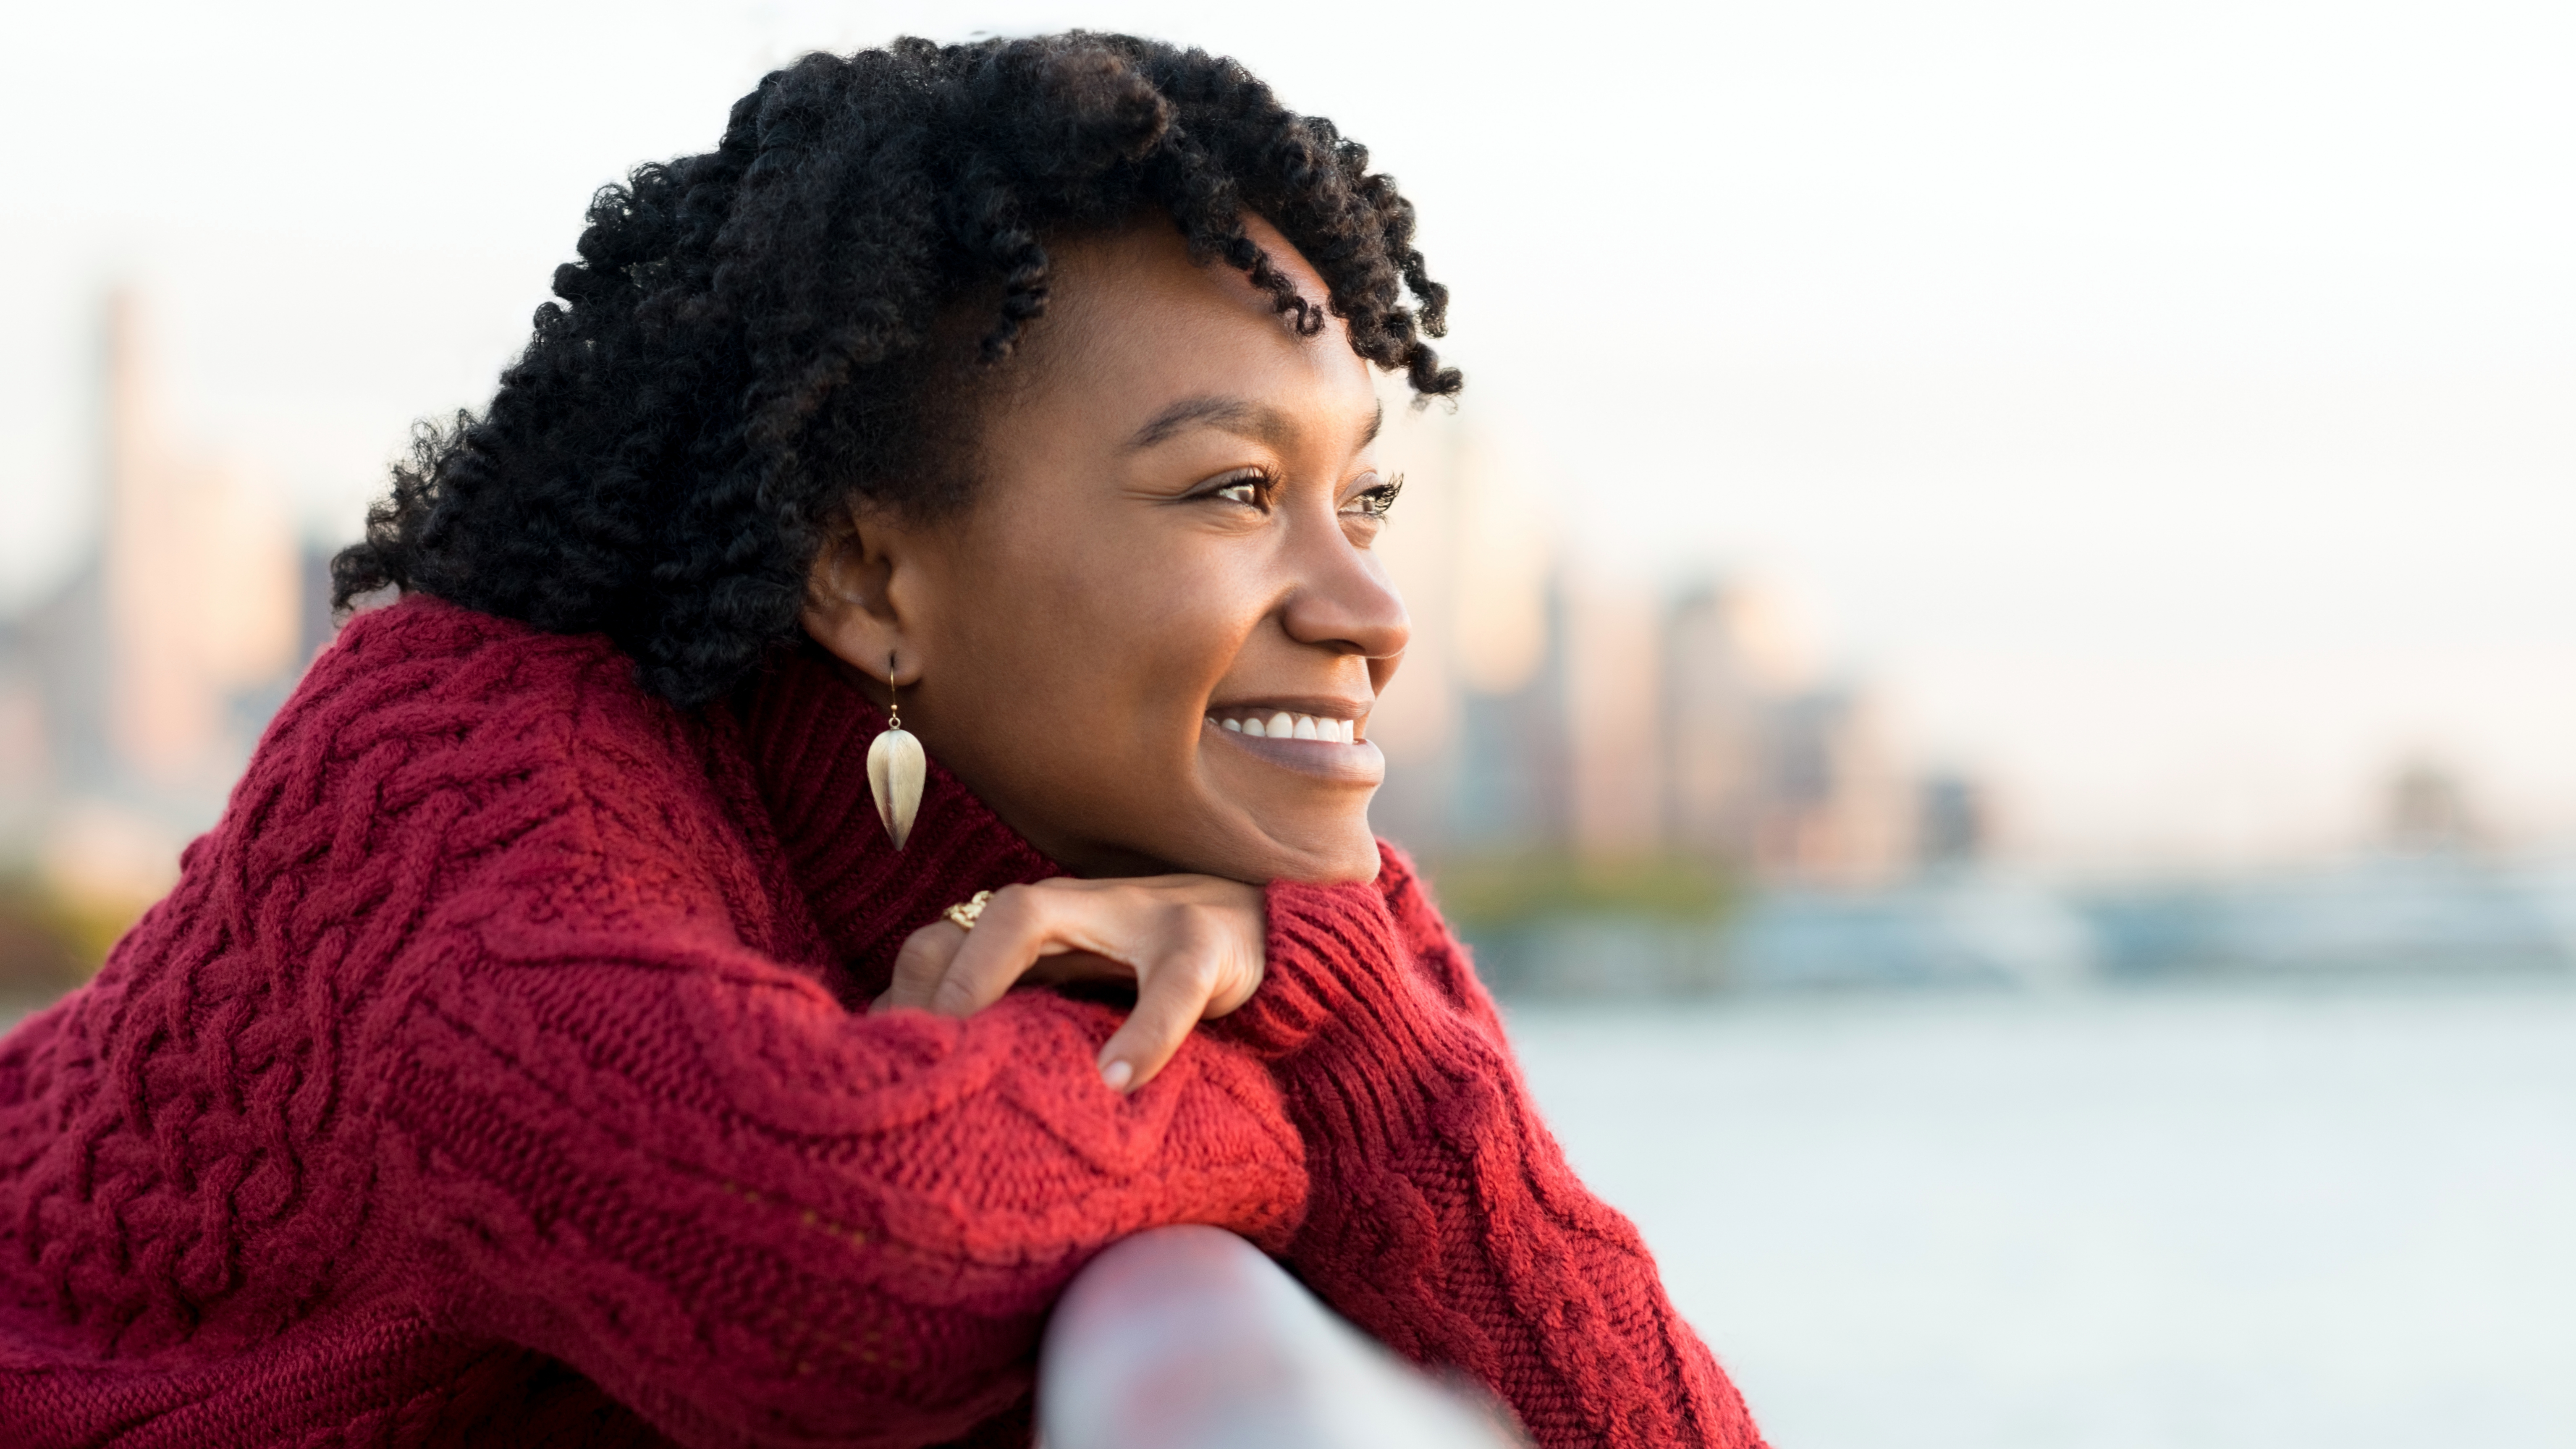 7 tips to live a happier life - Mayo Clinic News Network